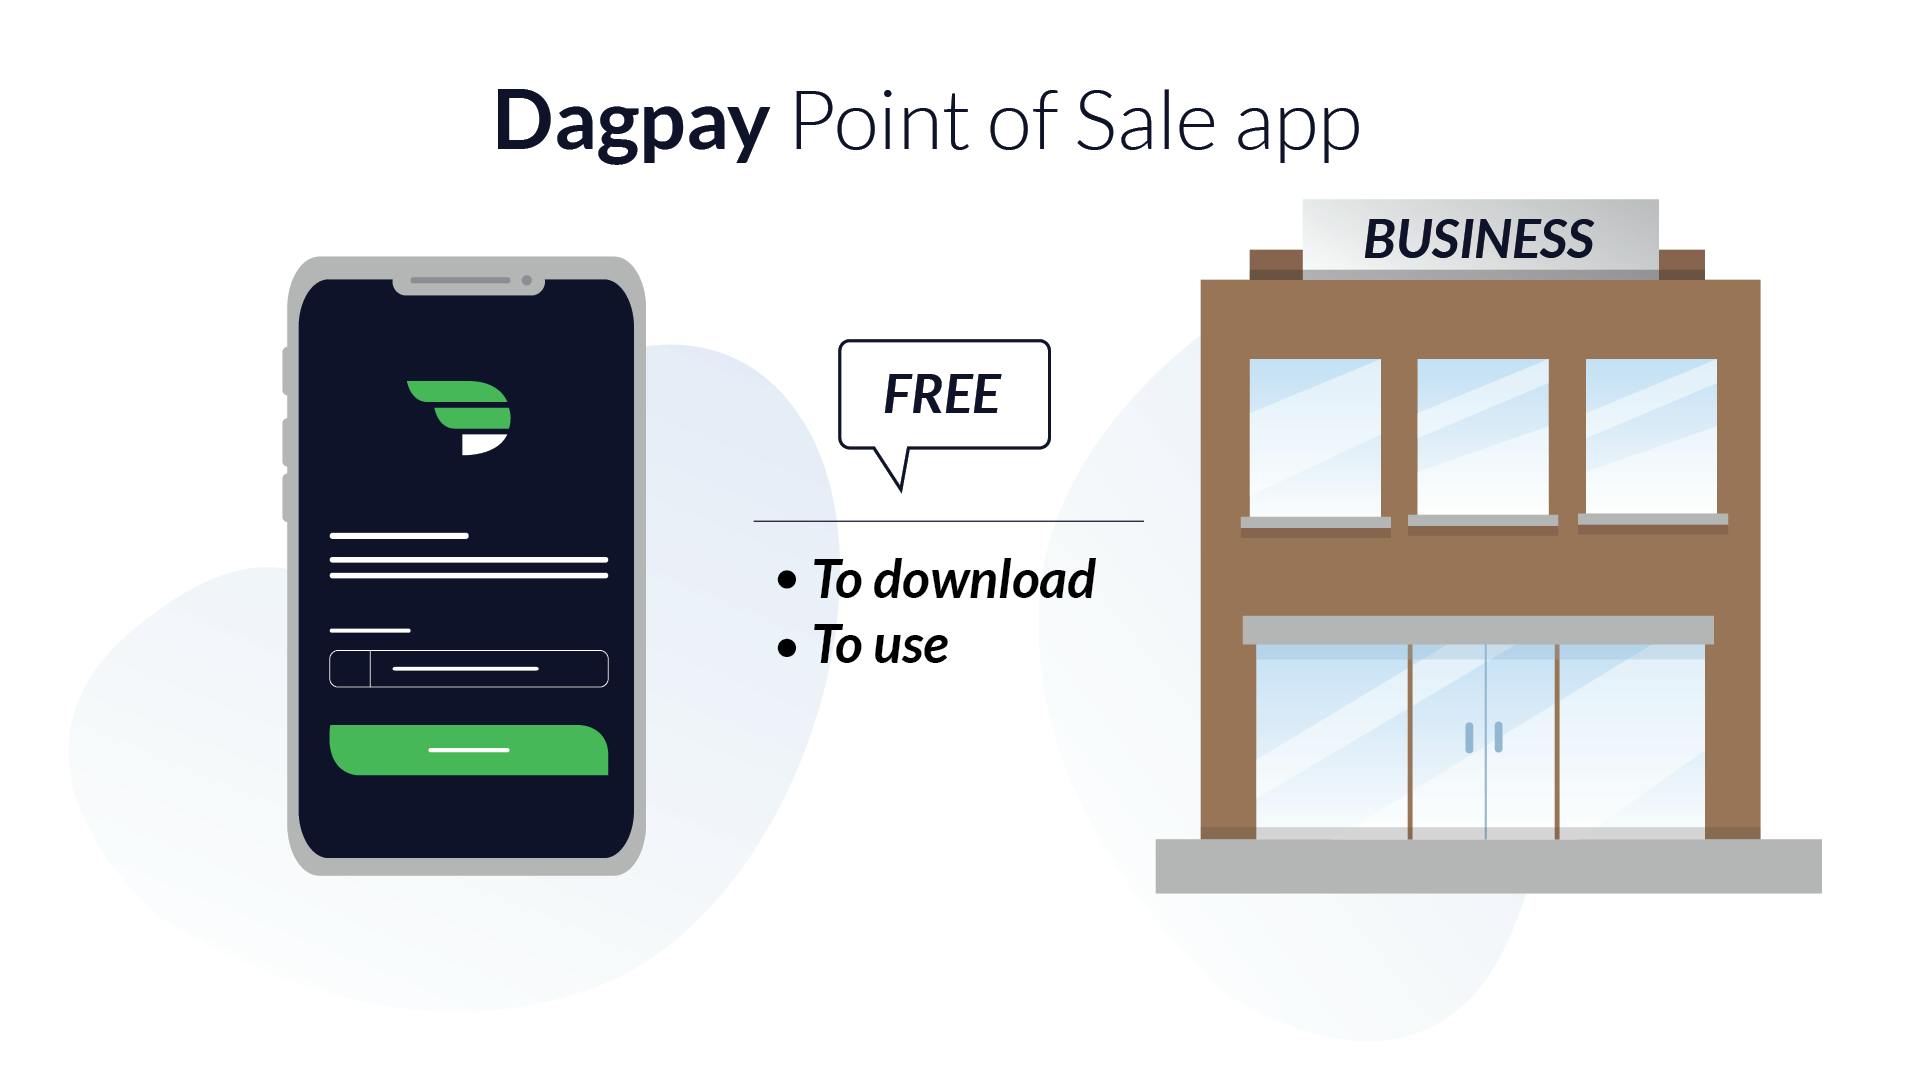 5 Benefits of Using the Dagpay Point Of Sale App